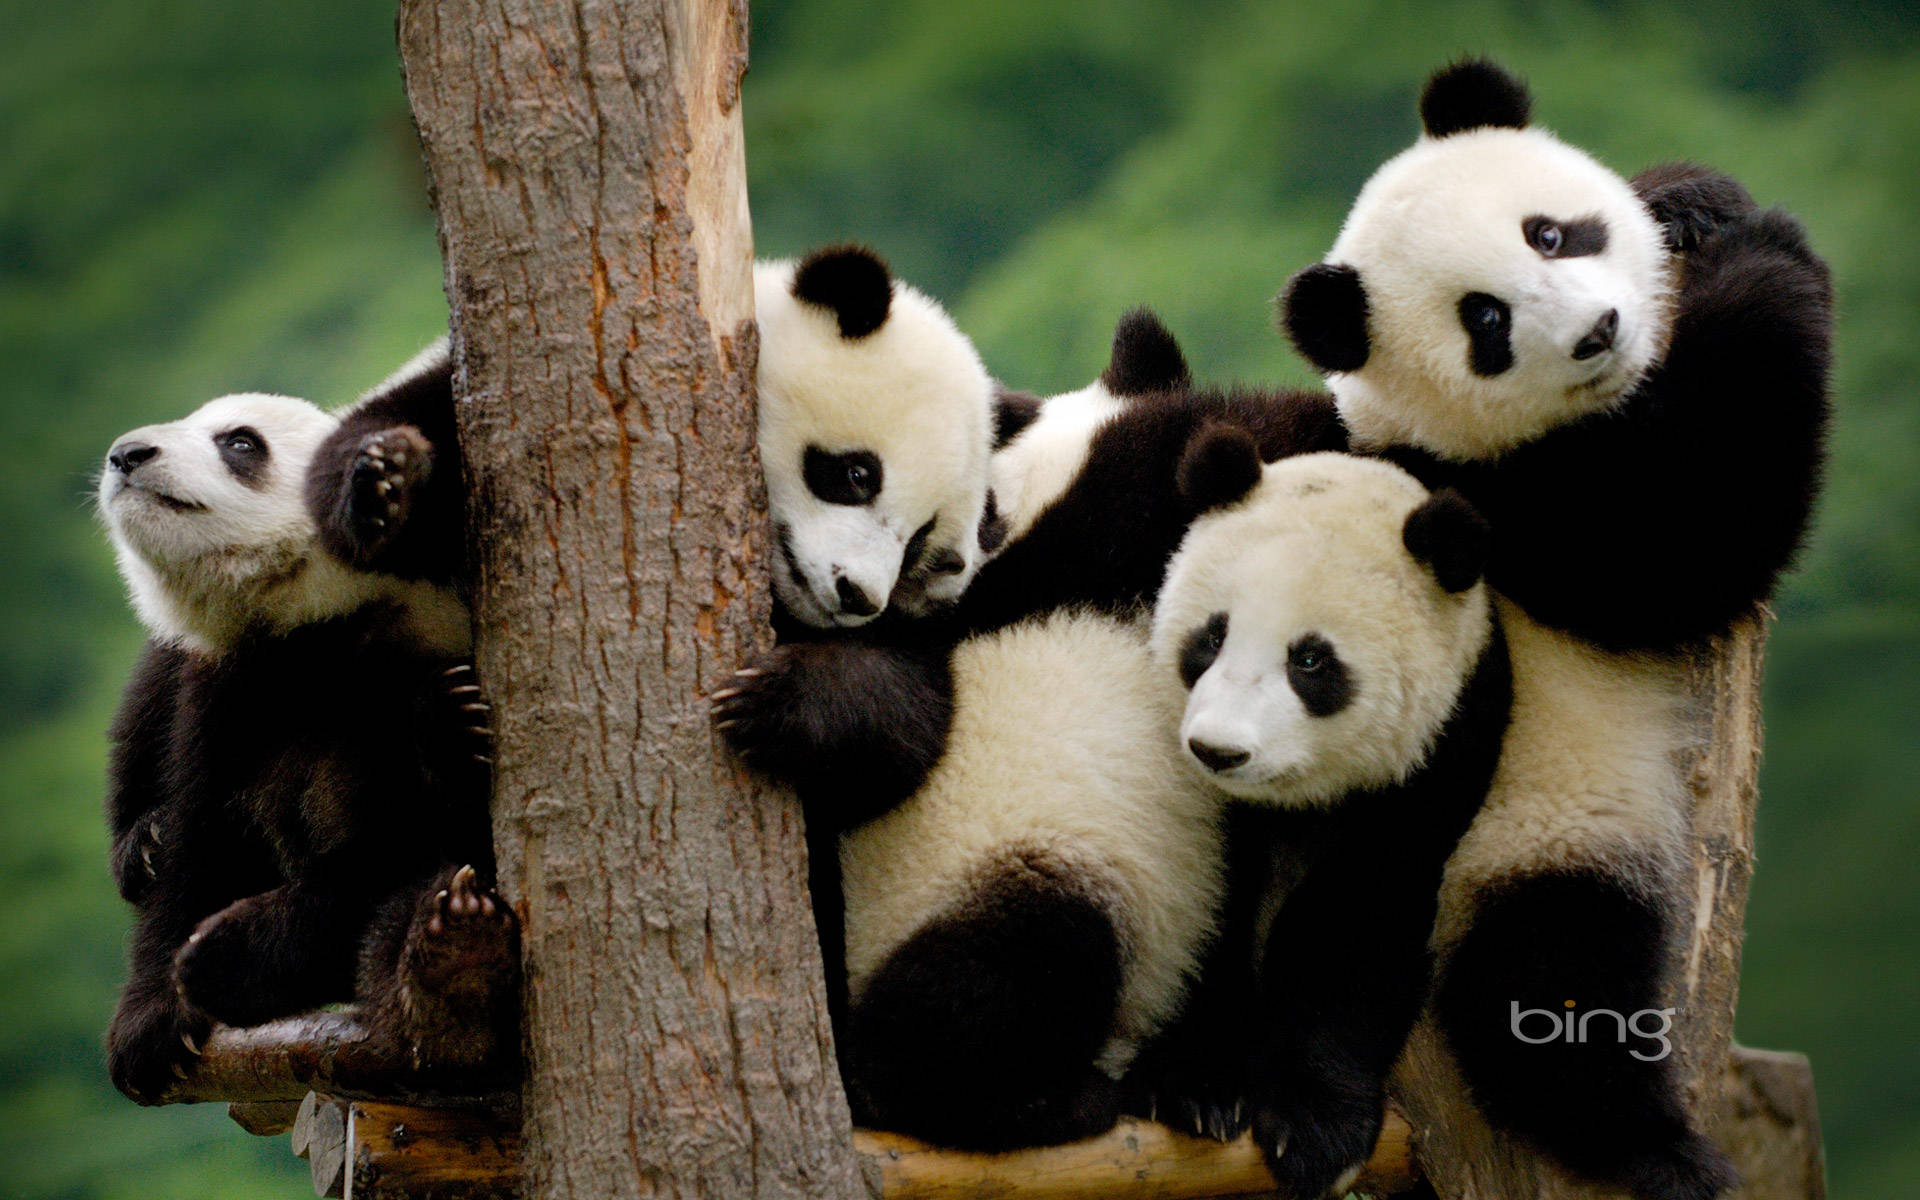 A happy group of pandas enjoying the natural beauty of the outdoors. Wallpaper